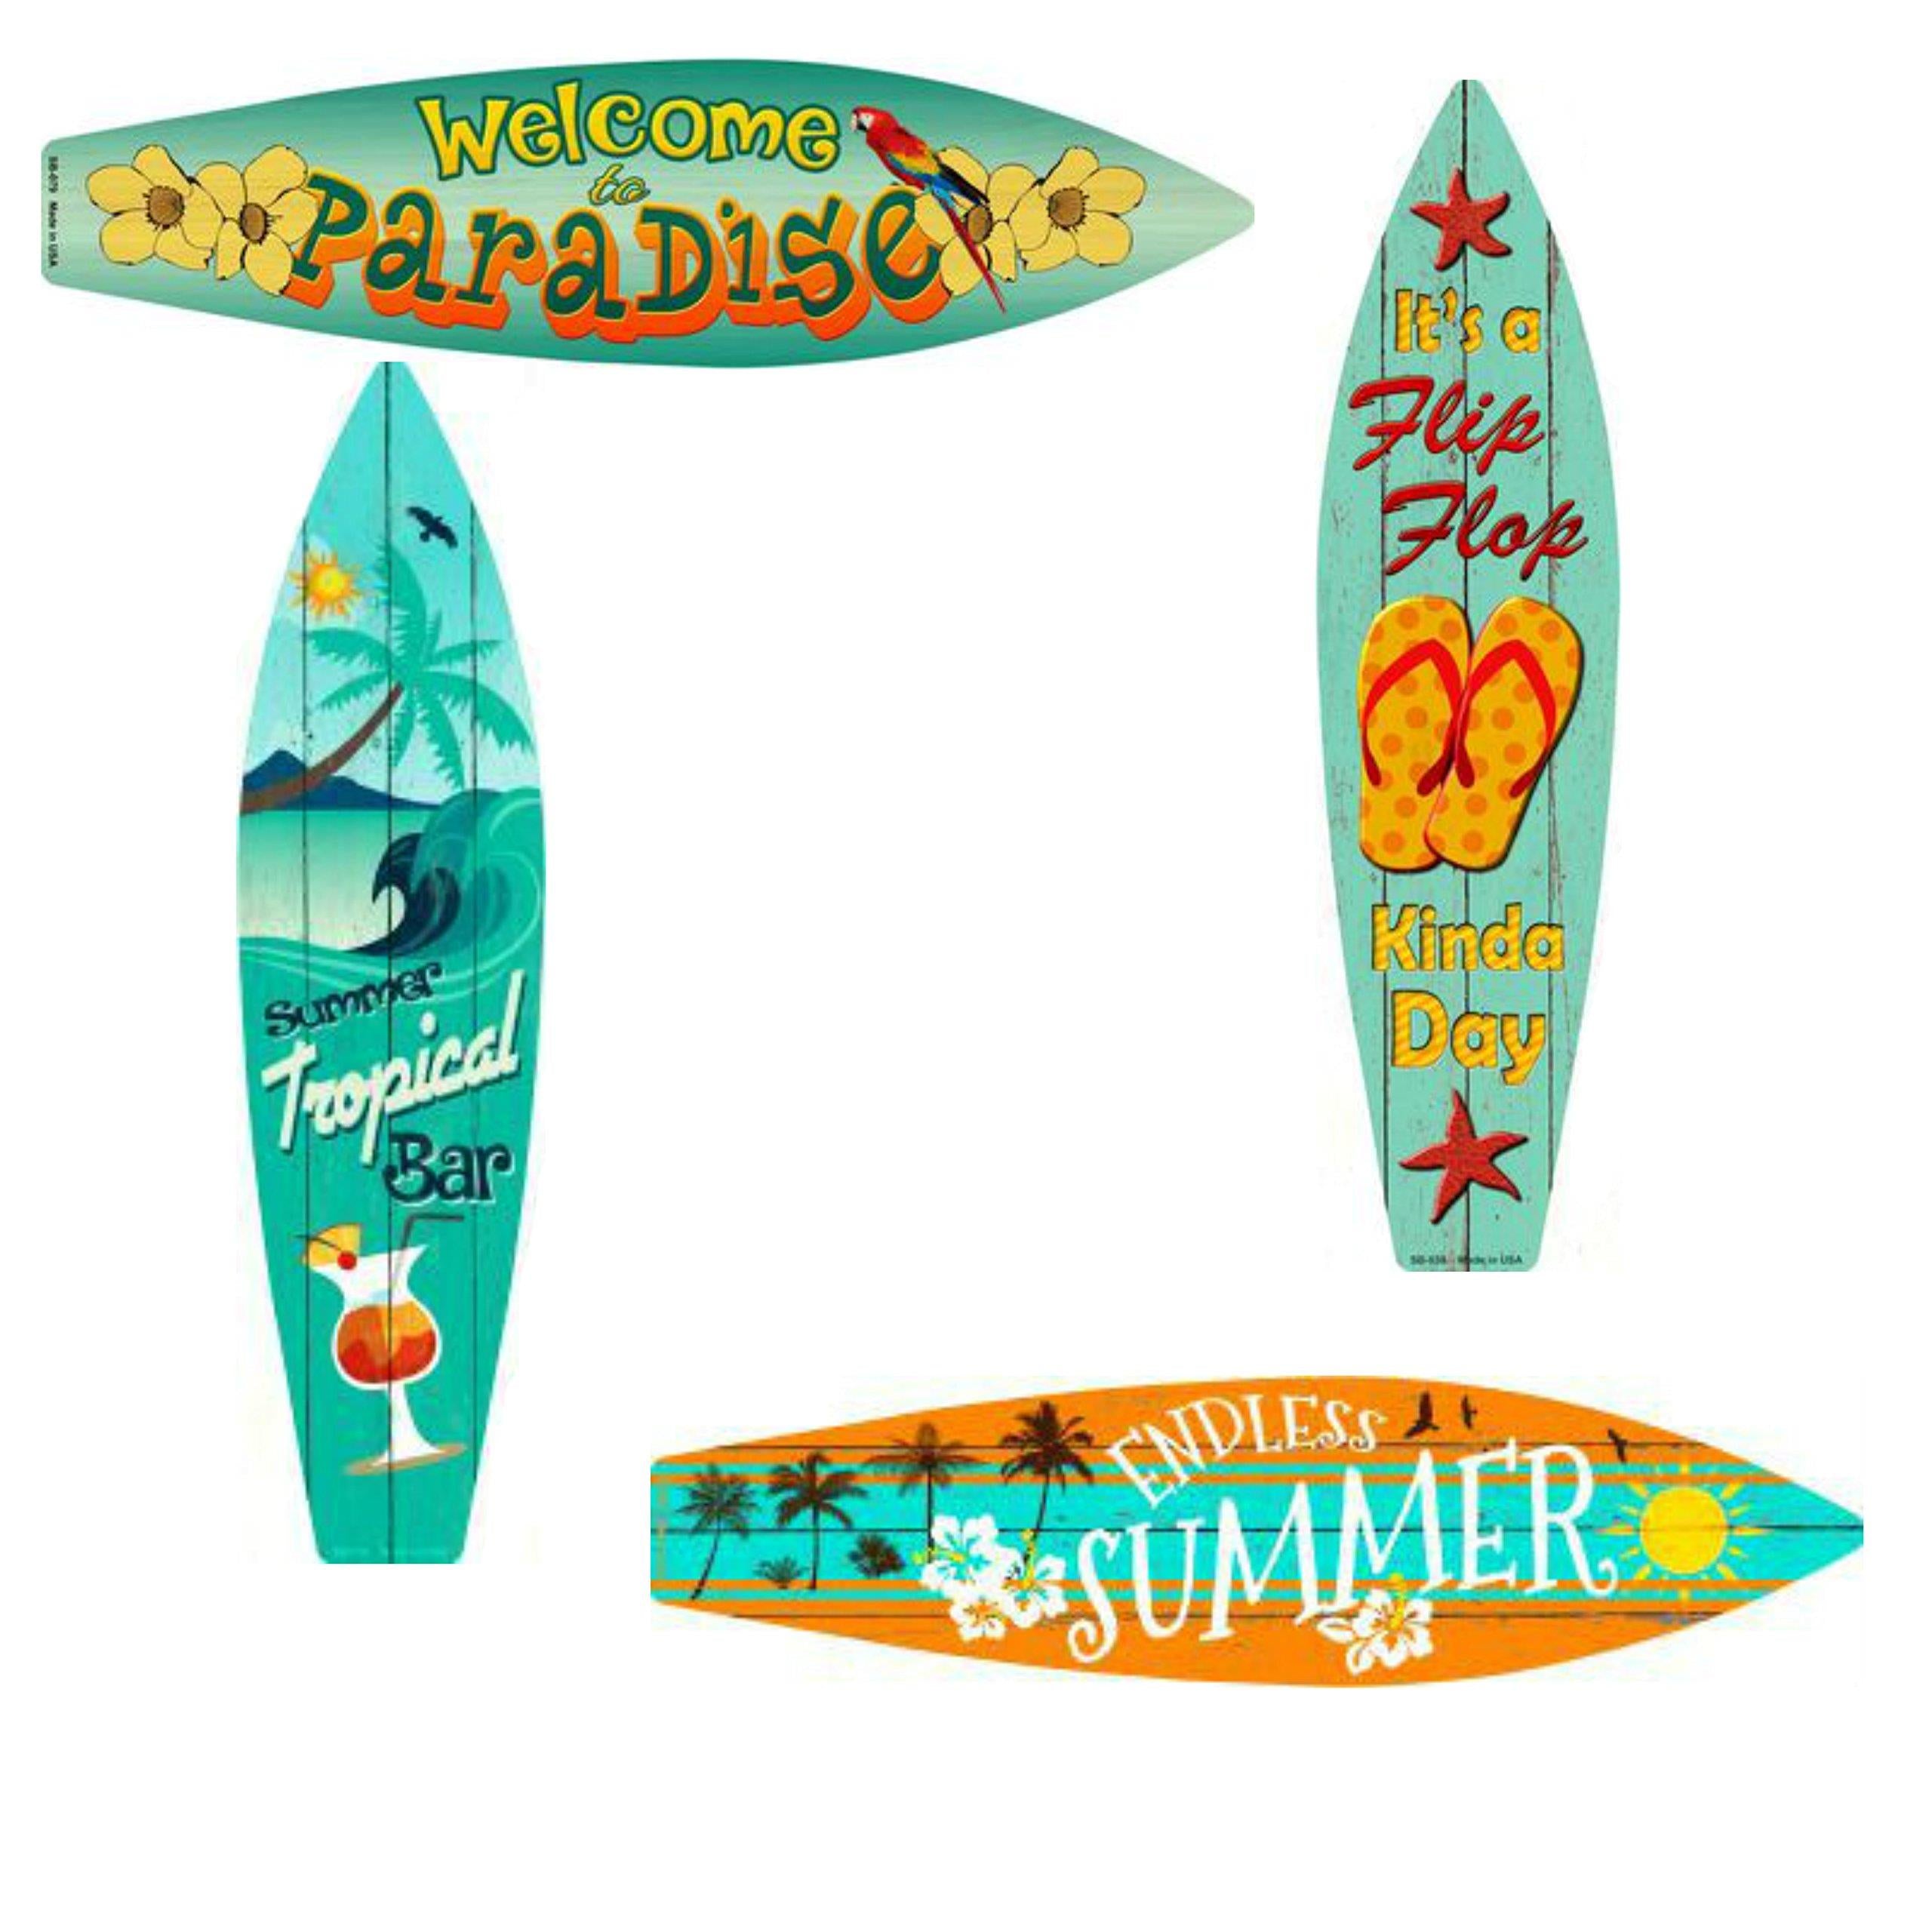 Bundle: Home Decor Metal Surfboard Beach Signs - Welcome to Paradise Sign, Endless Summer Sign, Tropical Bar Sign and Flip Flop Sign